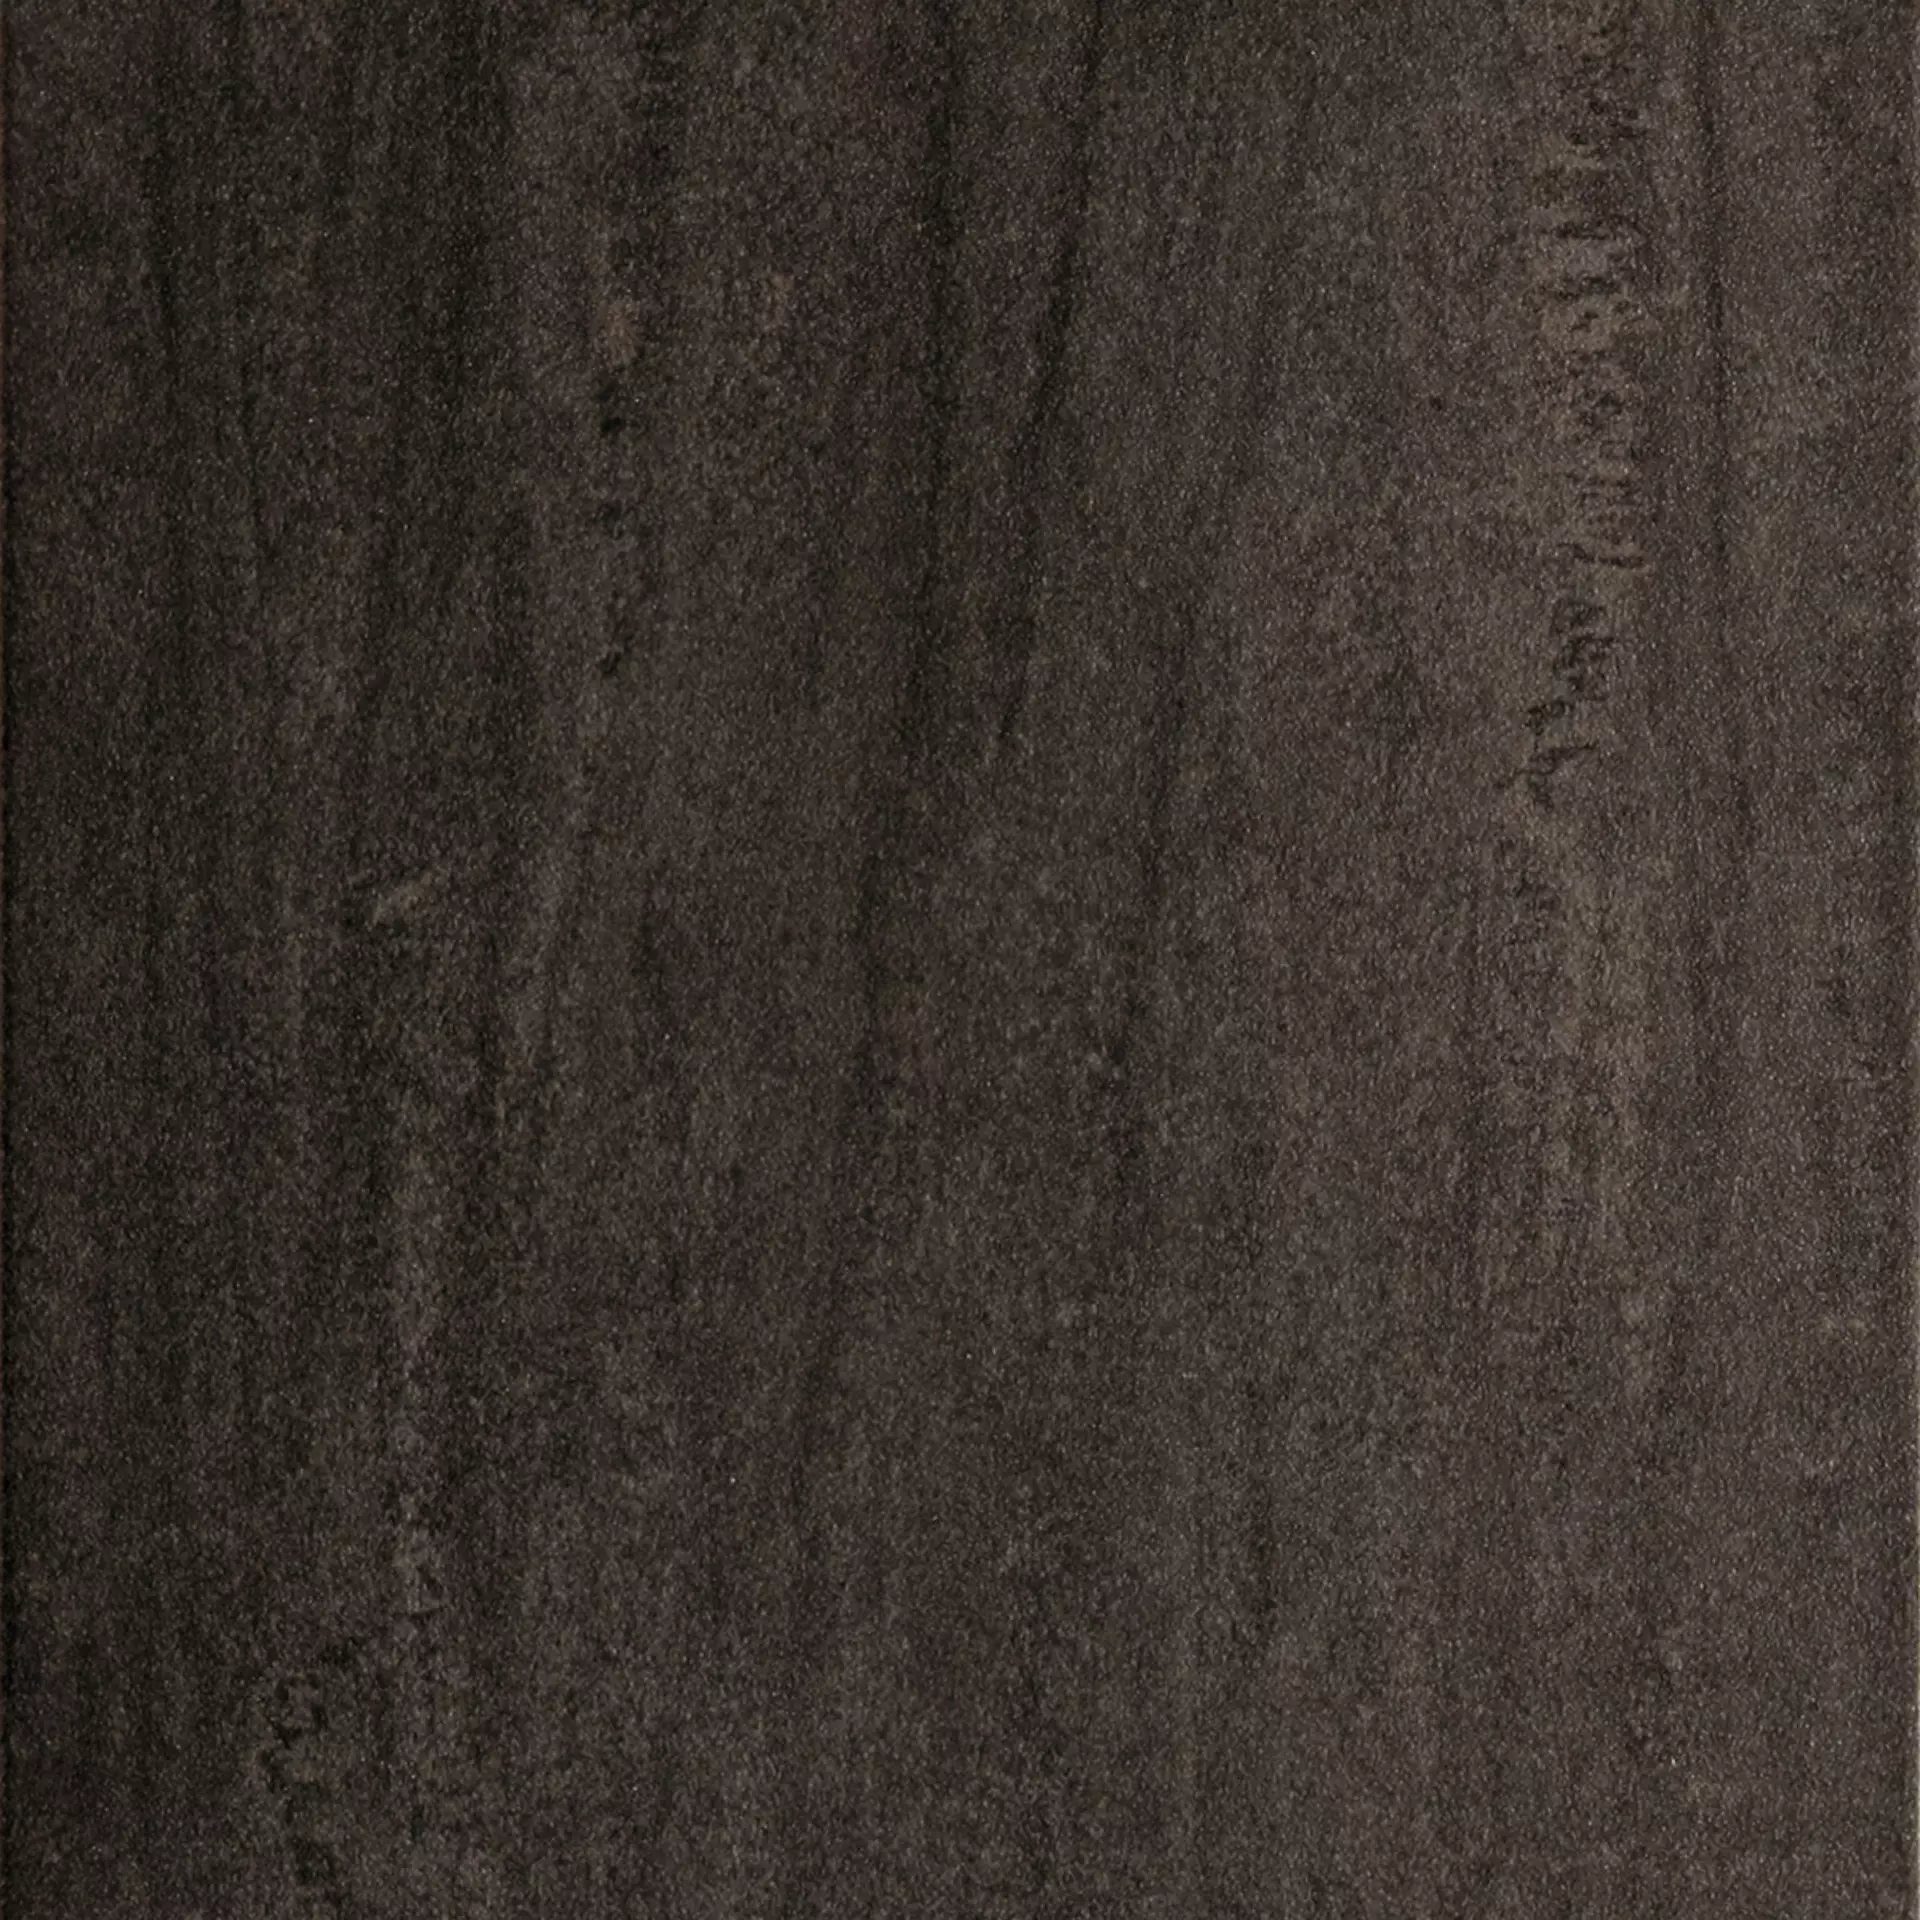 Rondine Contract Anthracite Naturale J84031 60x60cm rectified 9,5mm